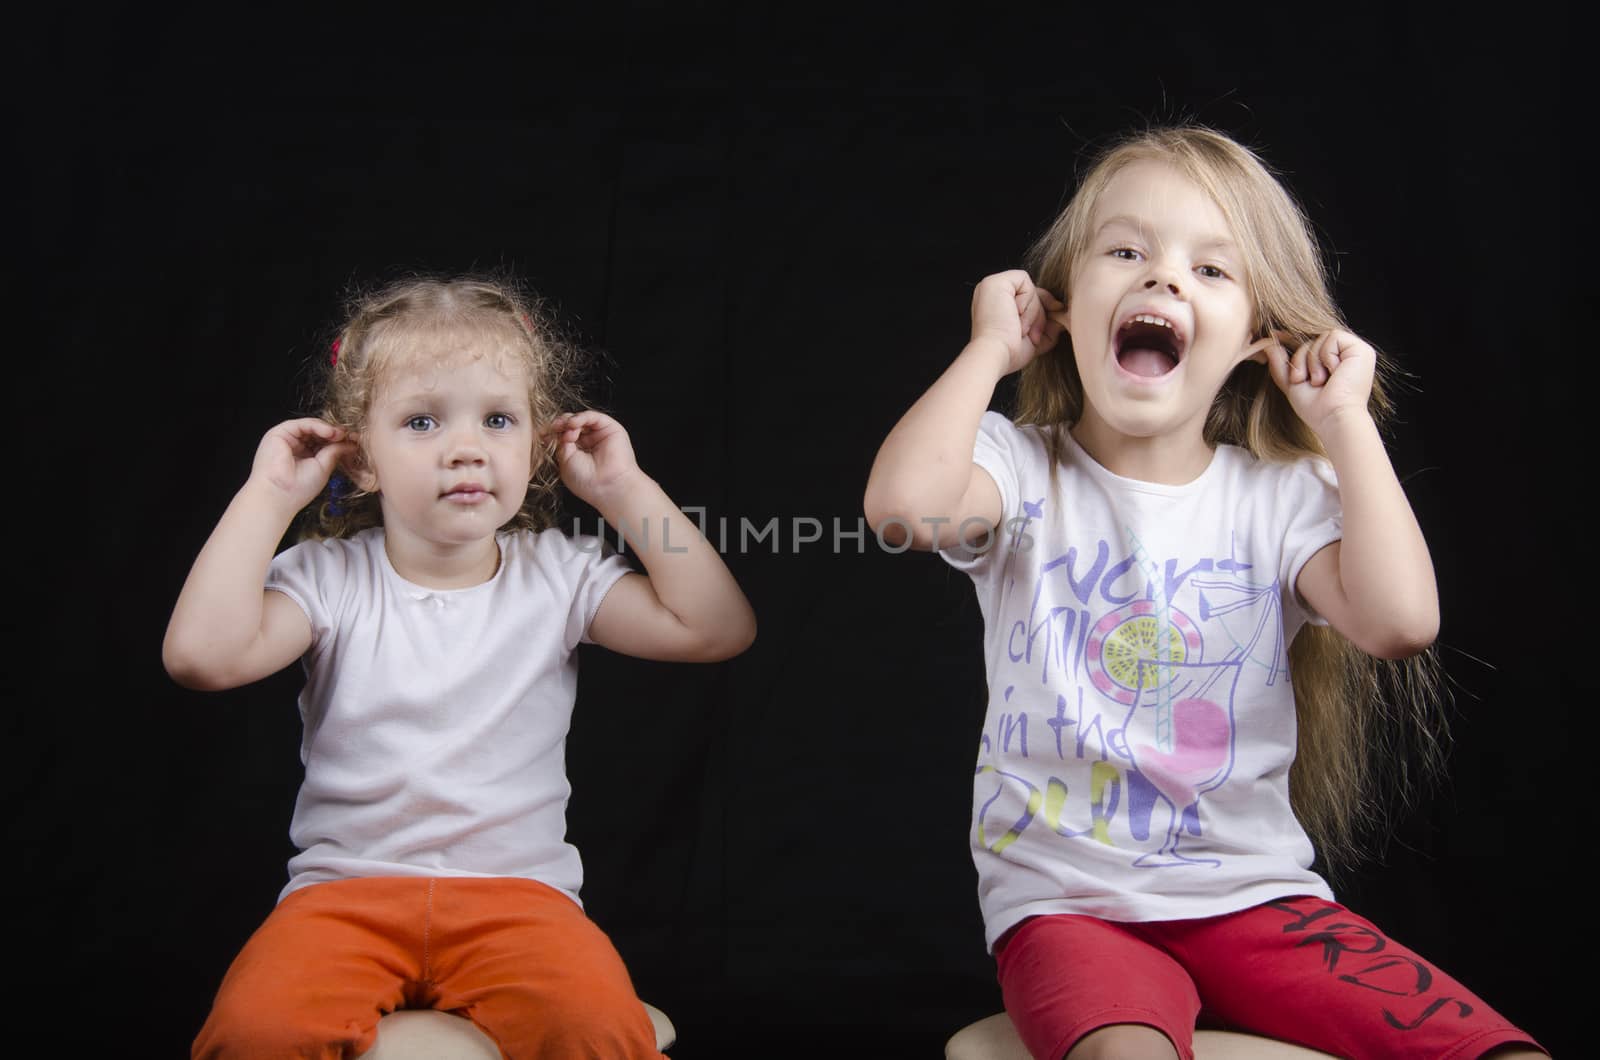 Portrait of the sisters - two little girls on the chairs. Girls fun smiling and looking in the frame. Girls hold hands behind your ears